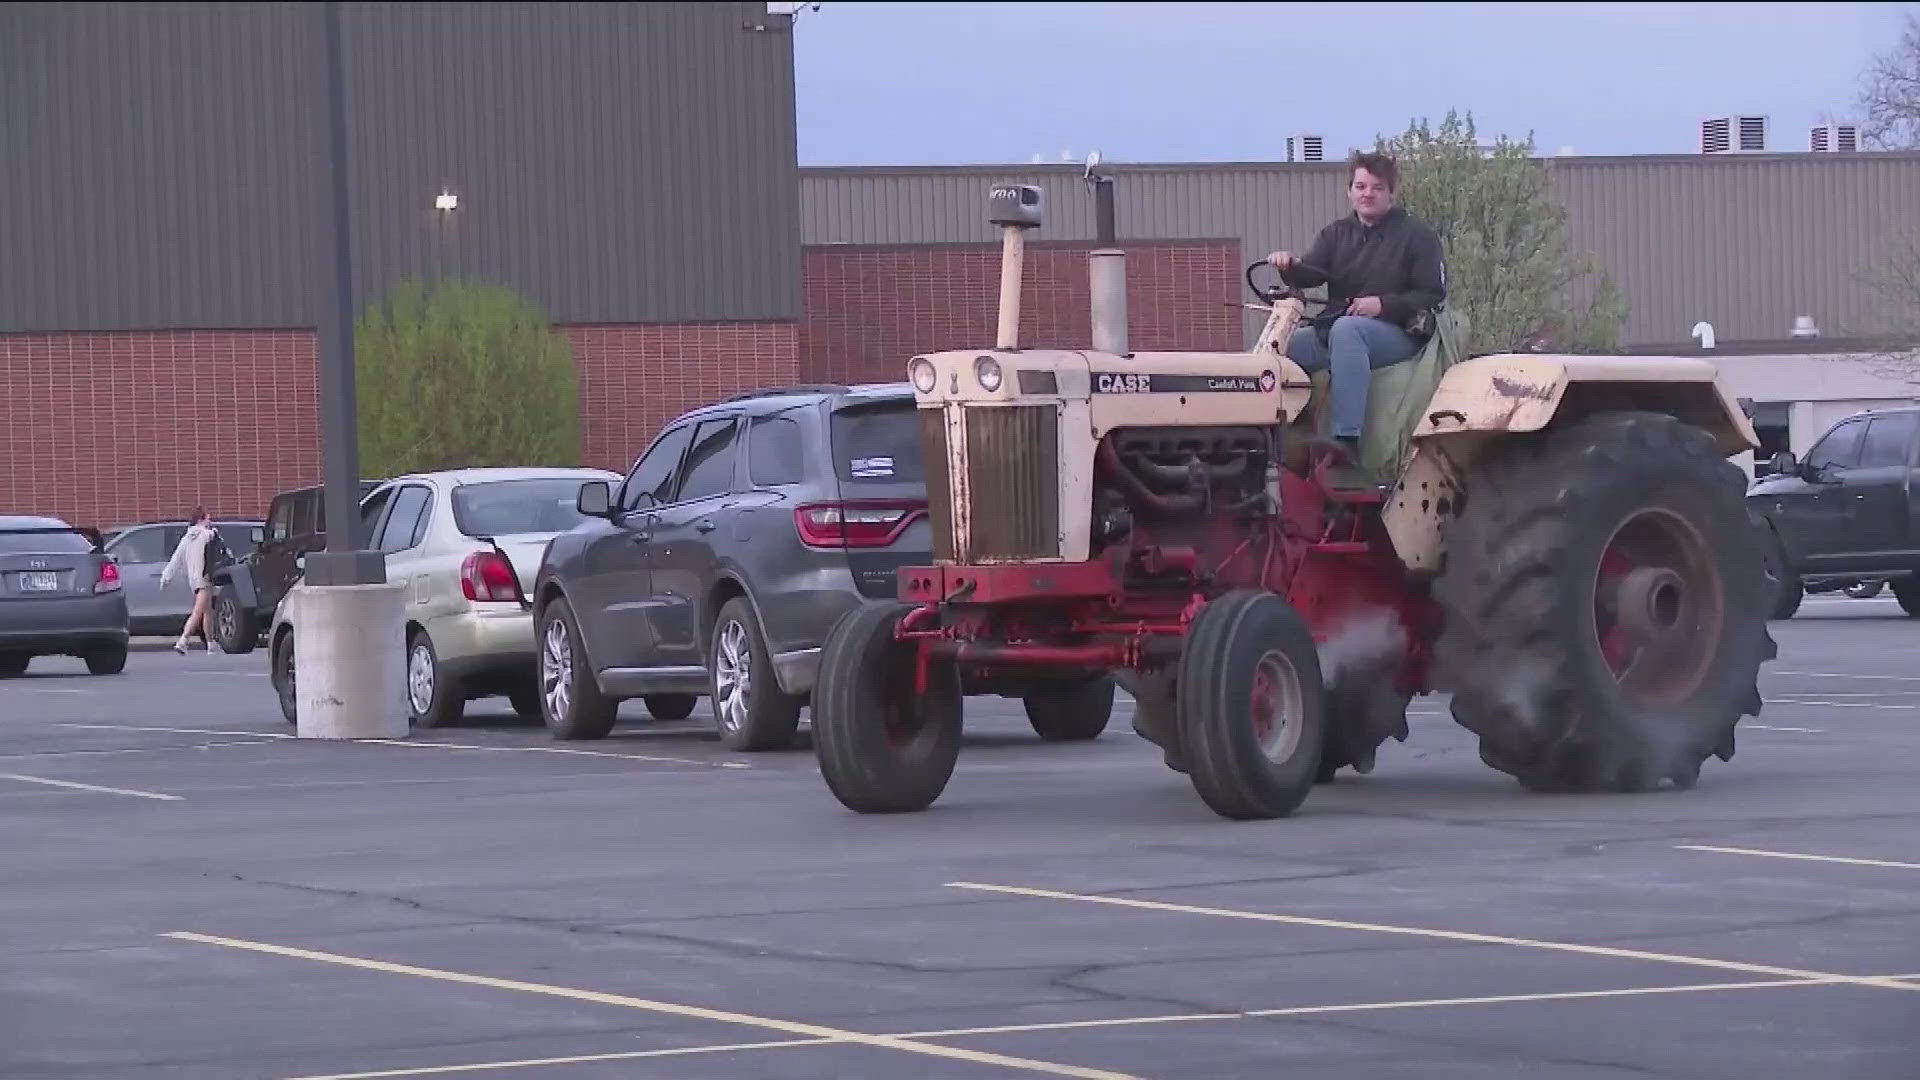 The Future Farmers of America chapter at Plymouth High School in Indiana rolled into school in style on April 23.